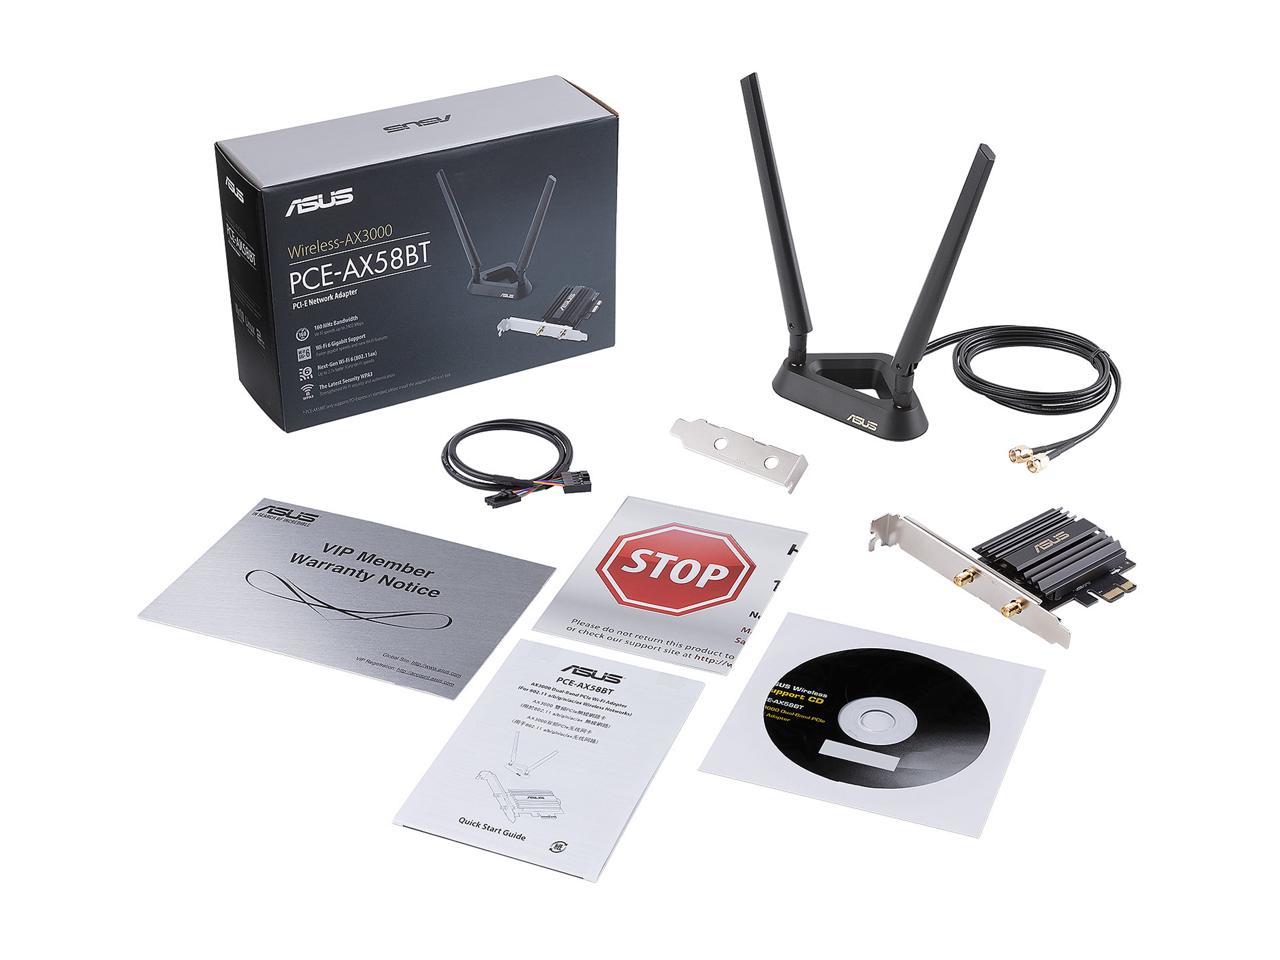 ASUS AX3000 (PCE-AX58BT) Next-Gen WiFi 6 Dual Band PCIe Wireless Adapter with Bluetooth 5.0 - OFDMA, 2x2 MU-MIMO and WPA3 Security - image 5 of 11